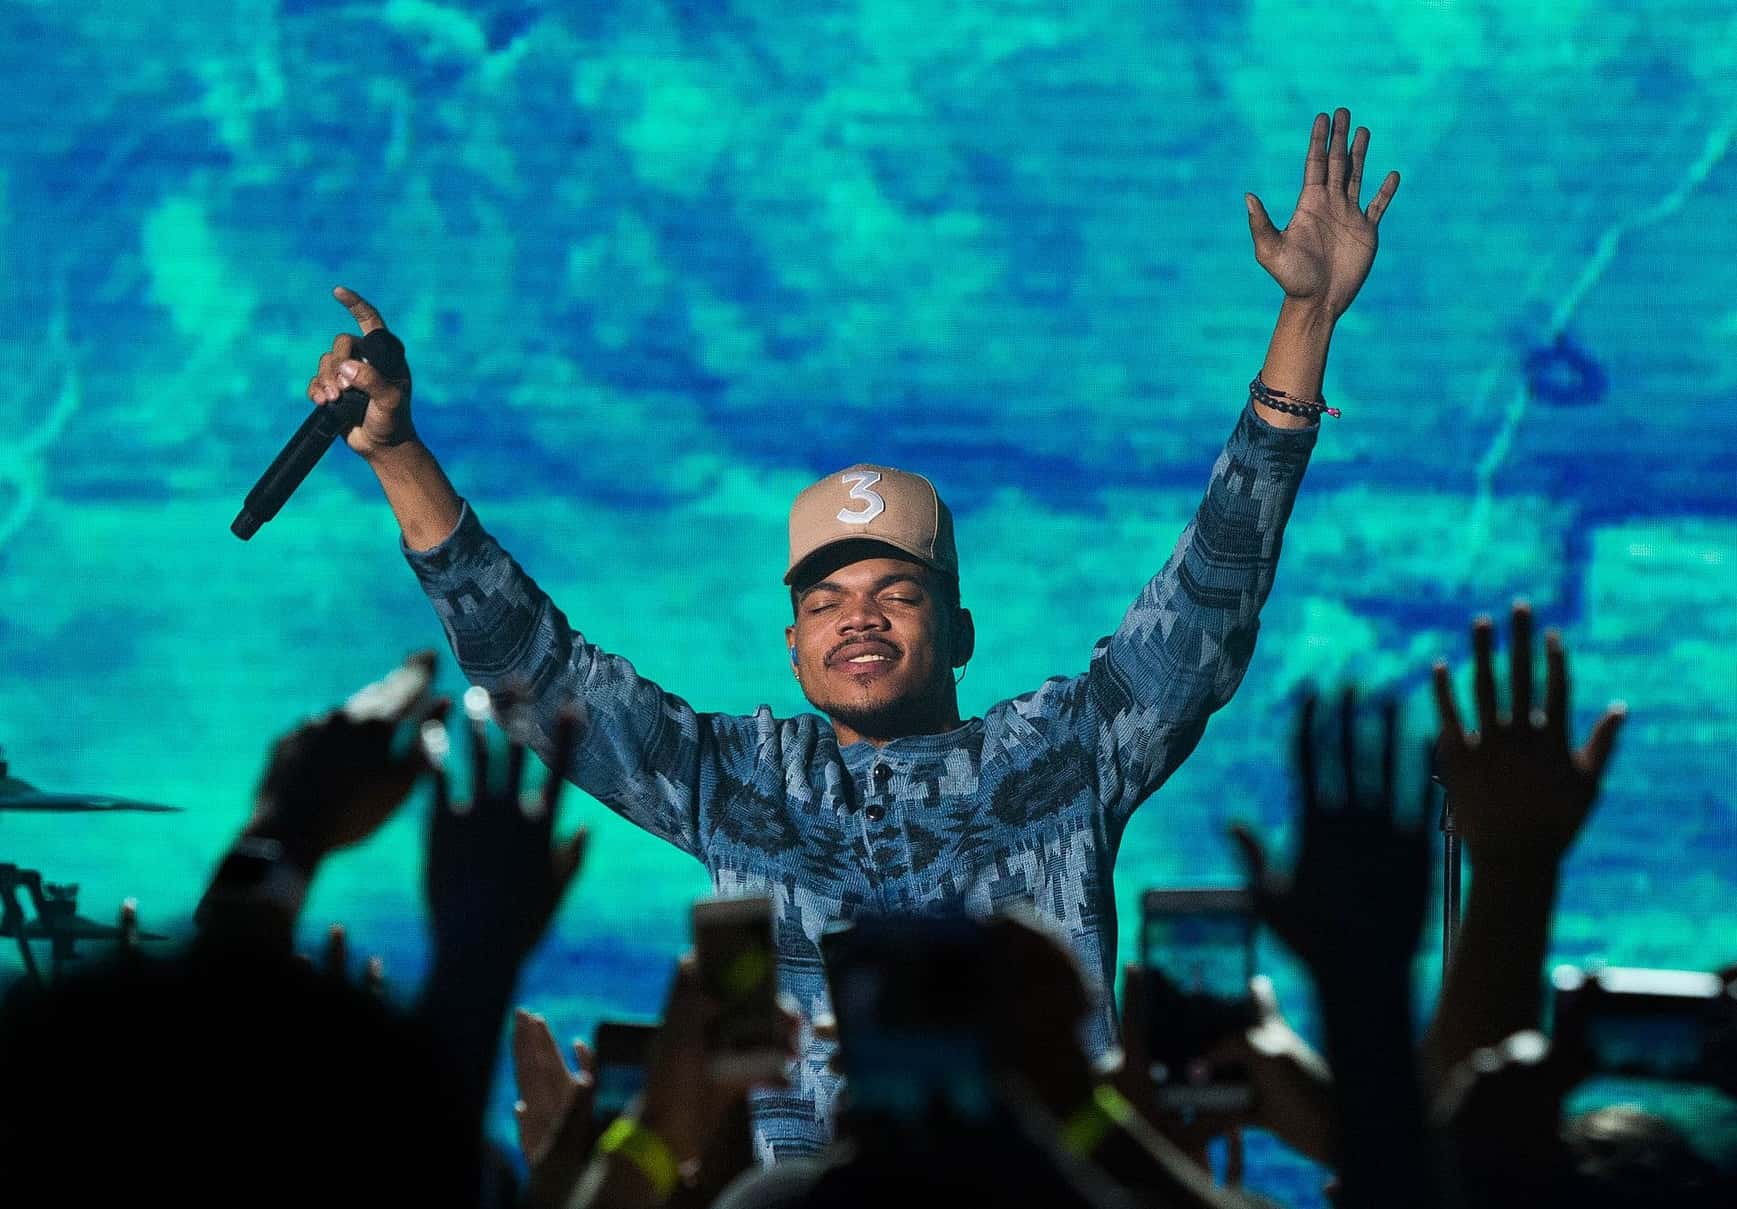 Chance The Rapper Facts